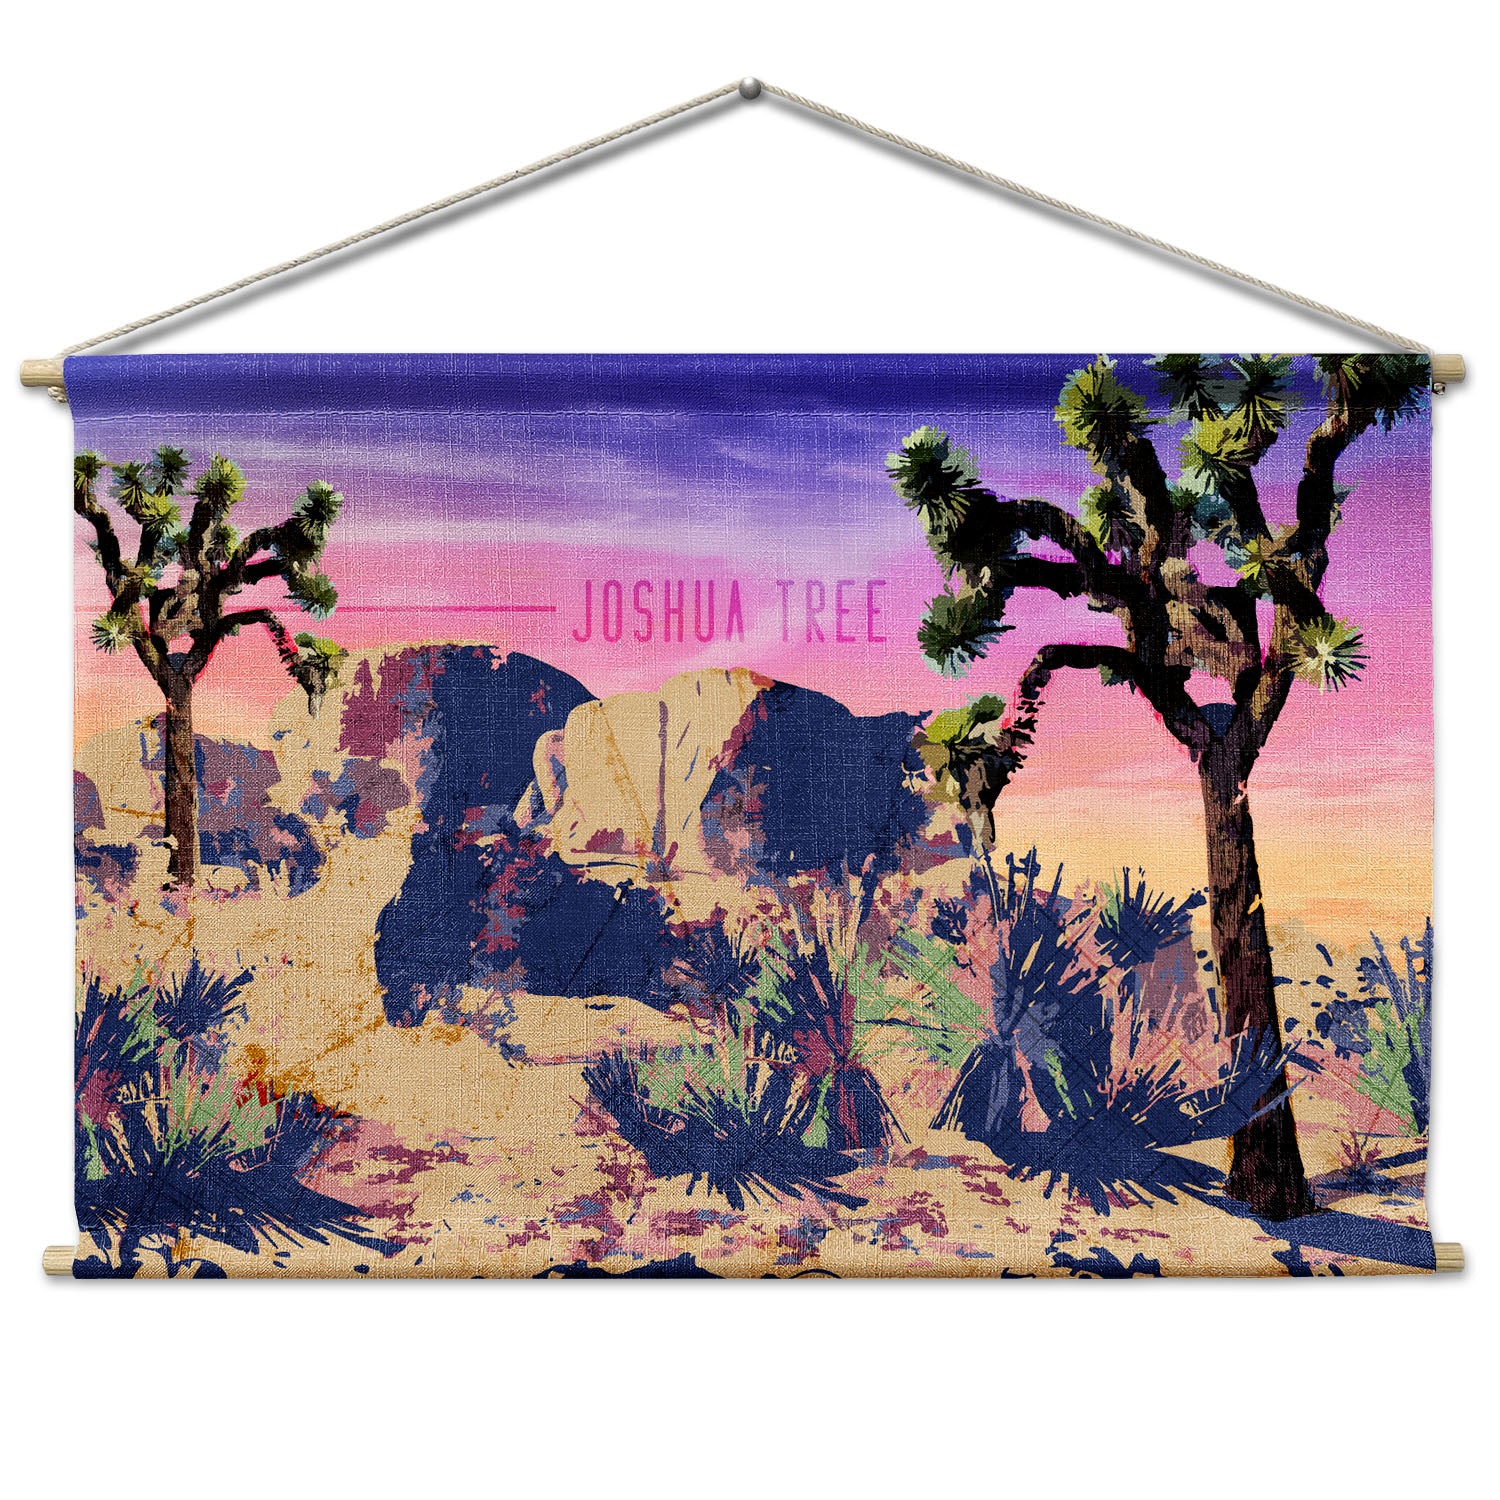 Joshua Tree National Park Abstract Landscape Wall Hanging - Natural -  - Knotty Tie Co.